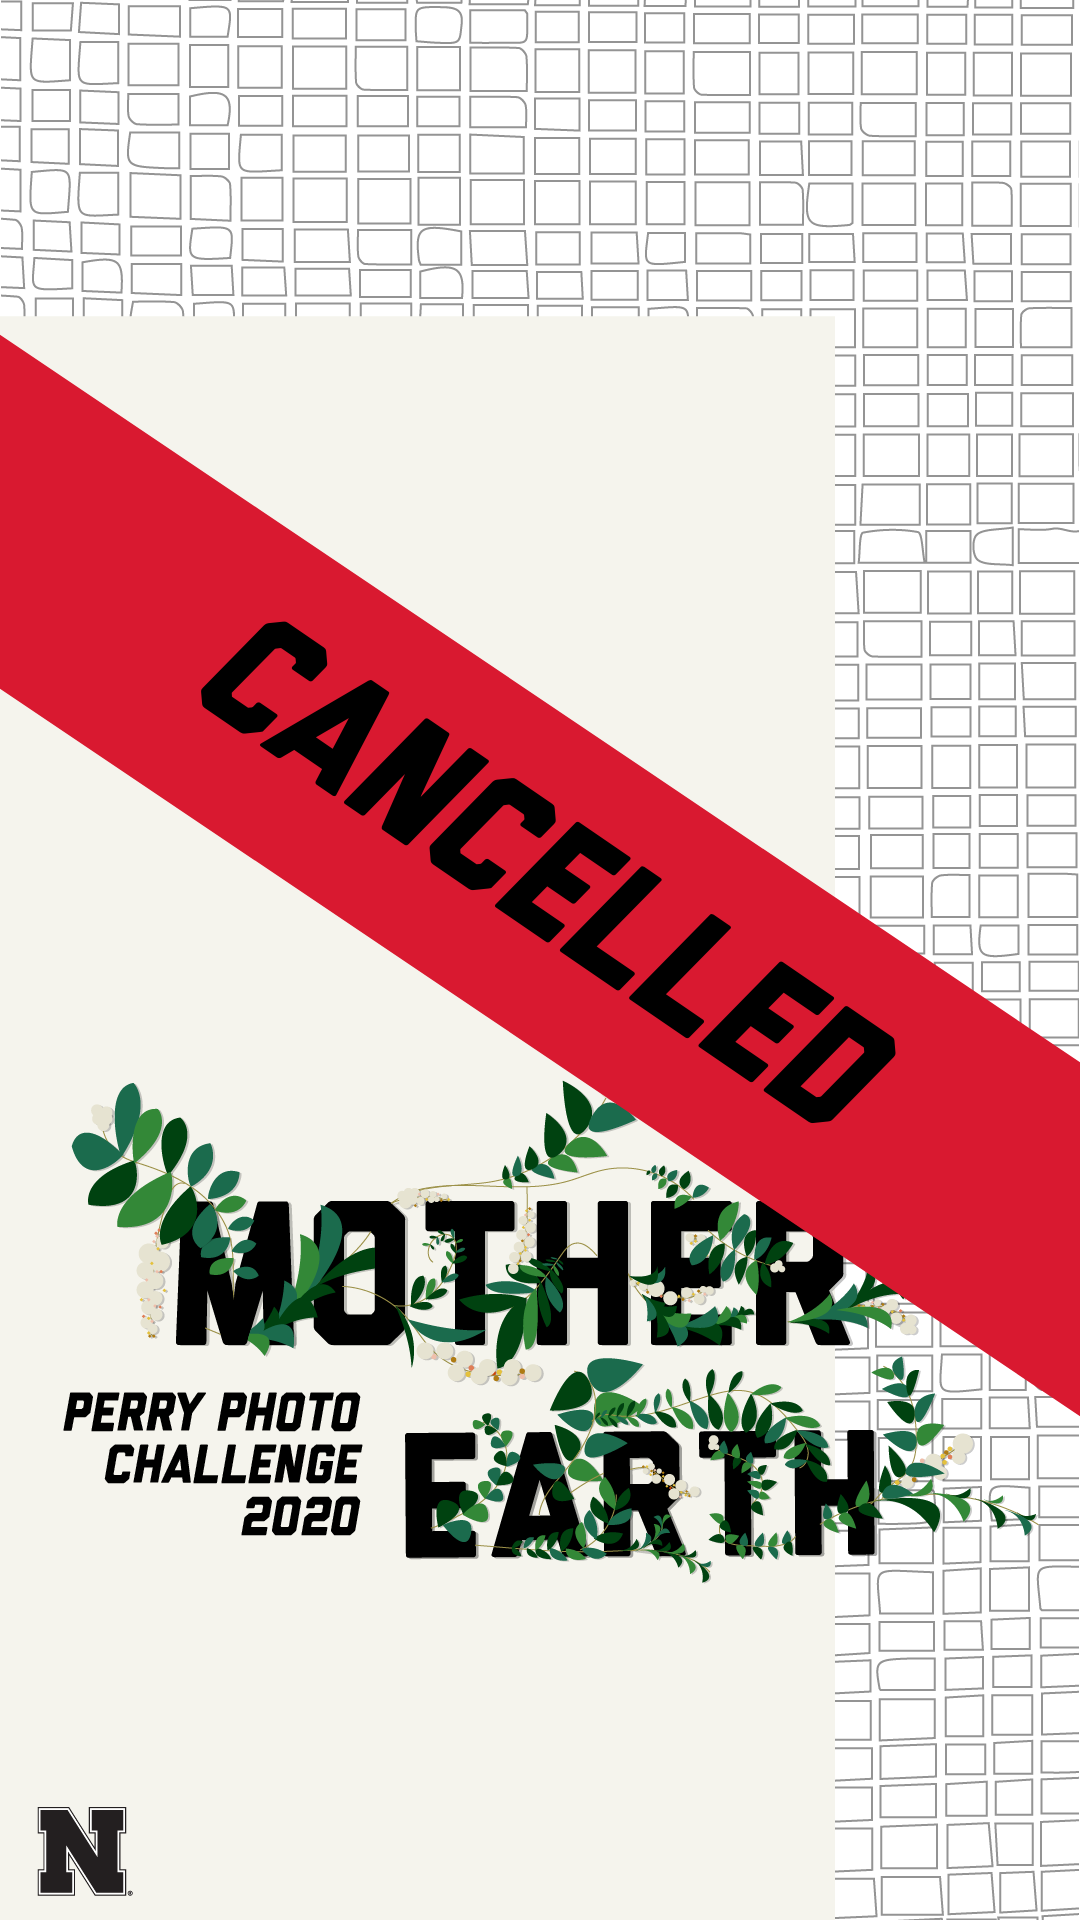 Perry Photo Cancelled